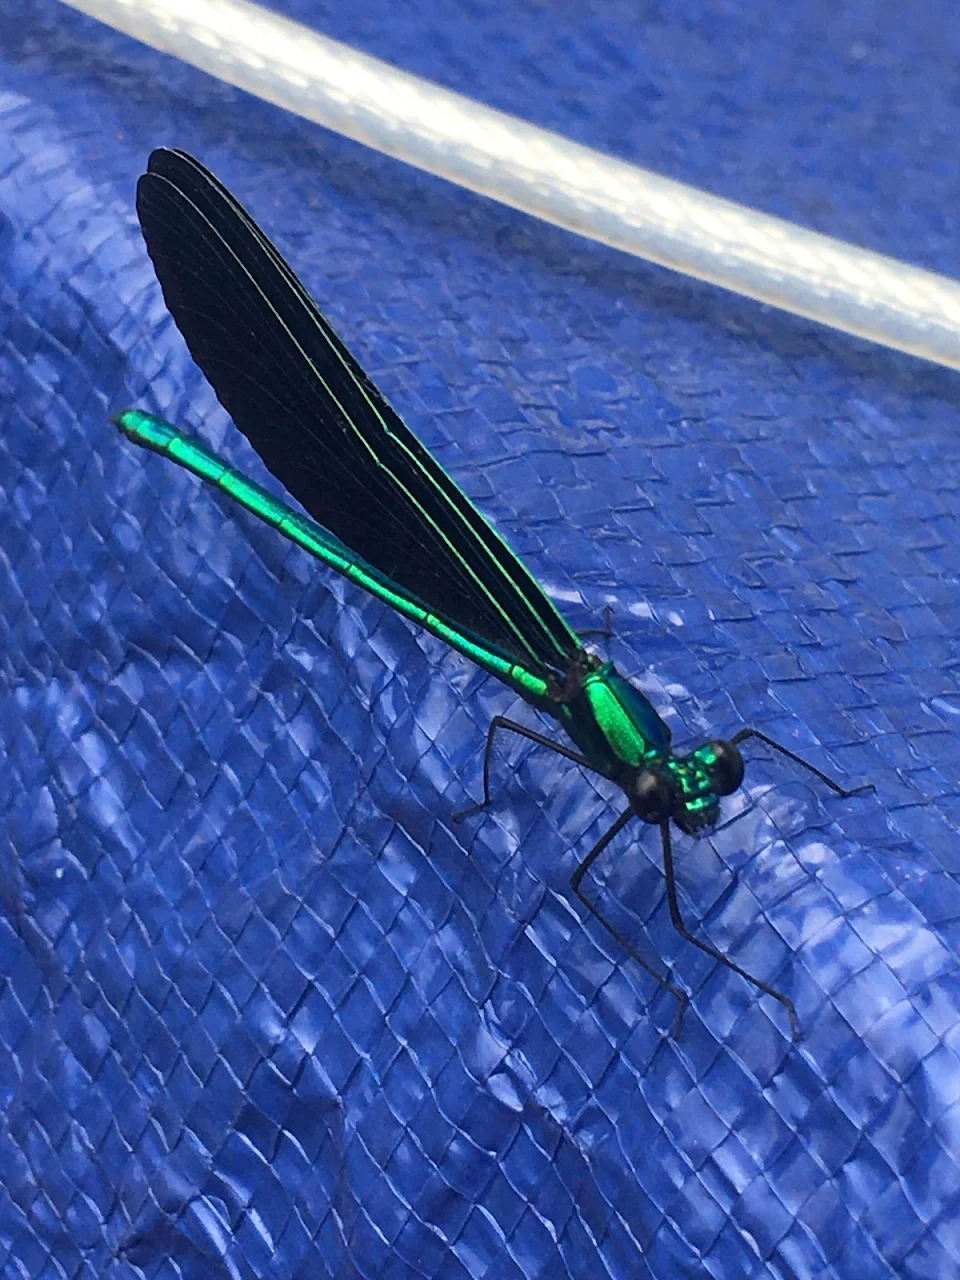 Found this cool little guy. A dragonfly of some sort I think.